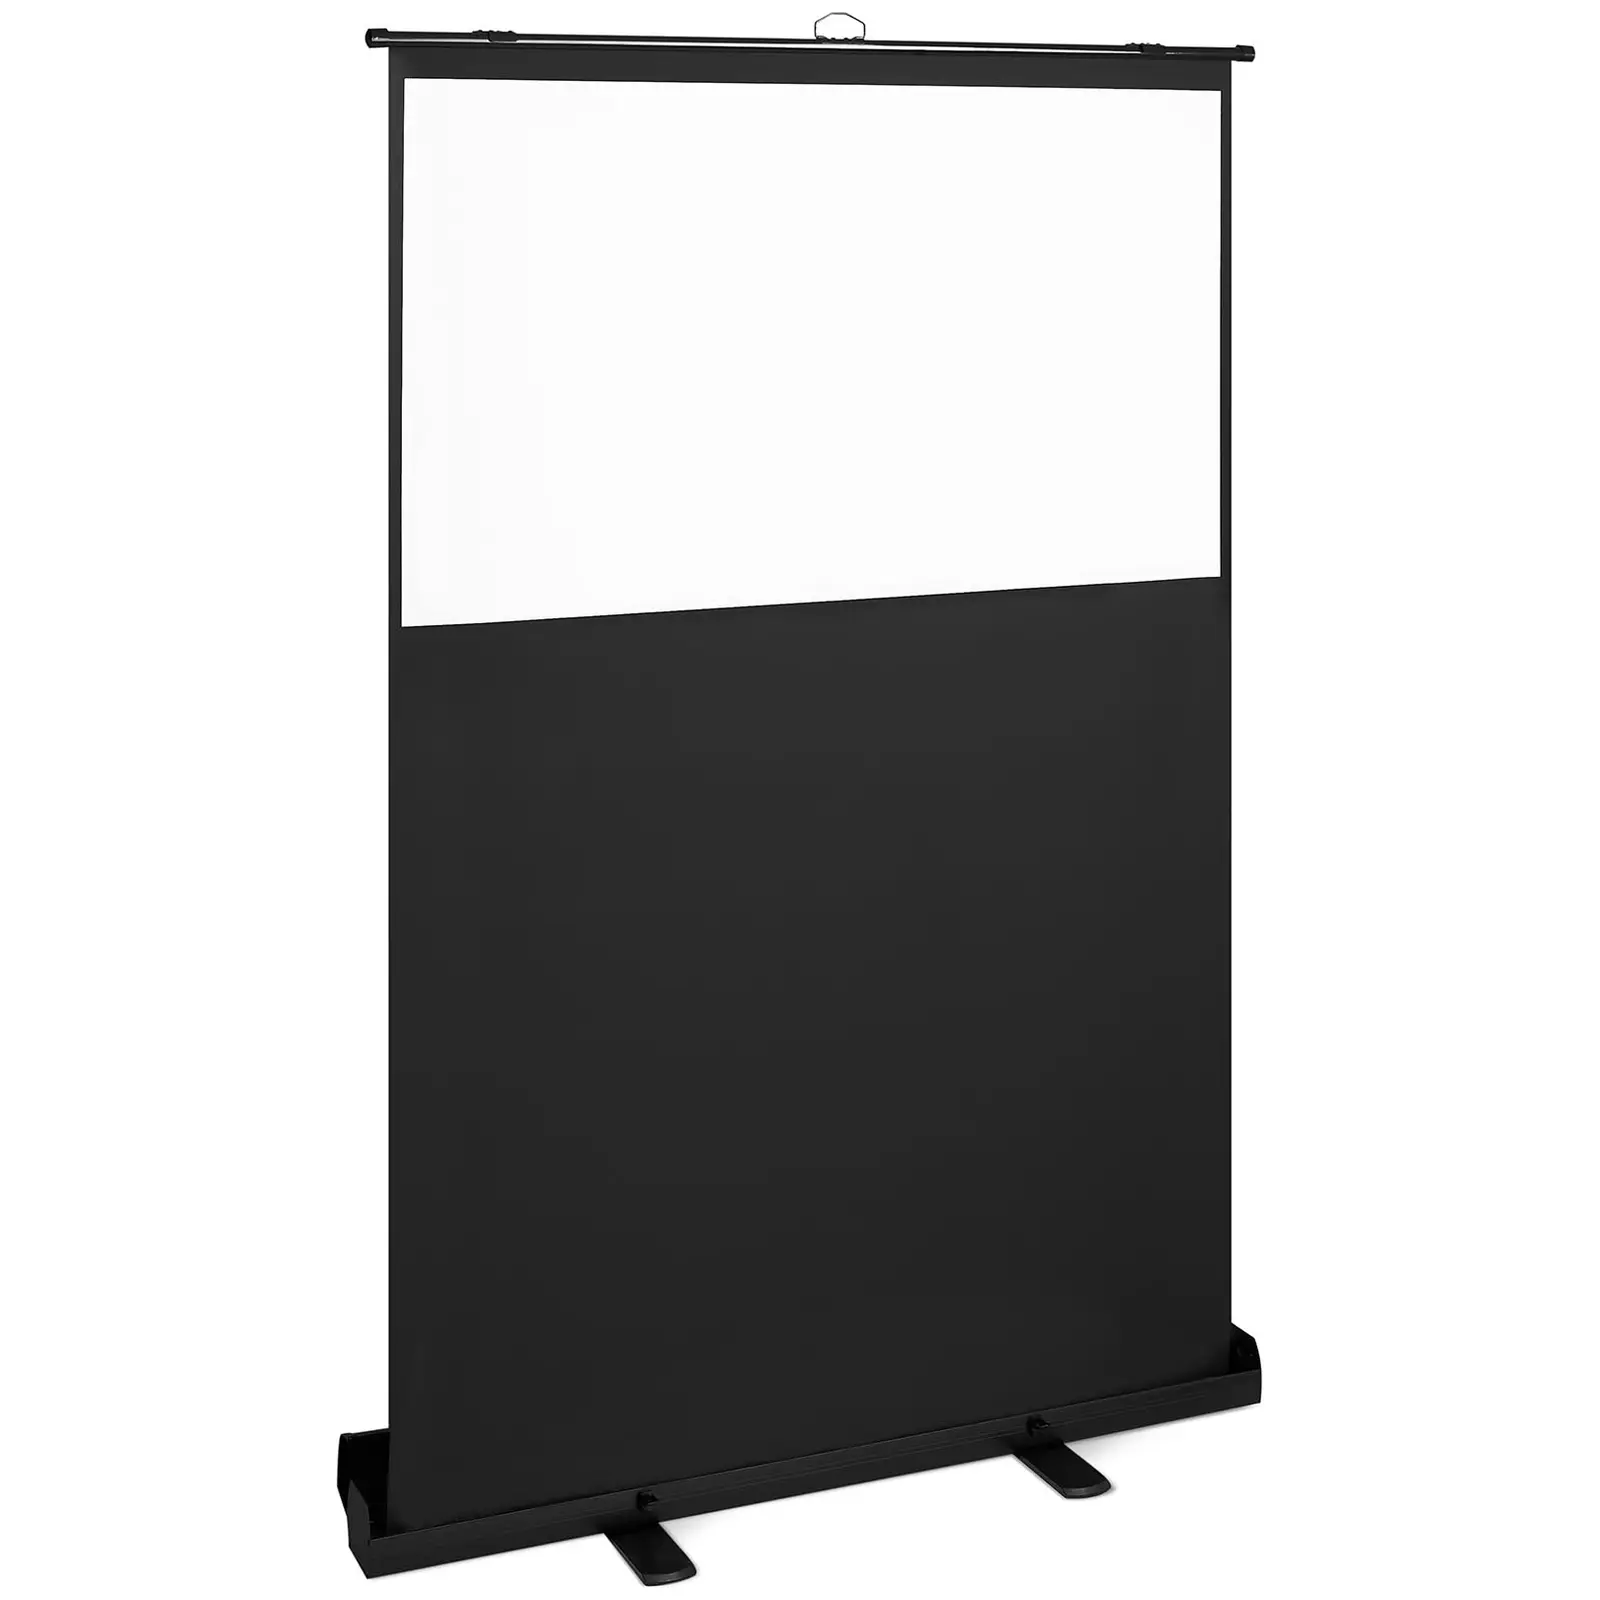 Roll-up Projector Screen - 144.5 x 203 cm - 16:9 - mobile